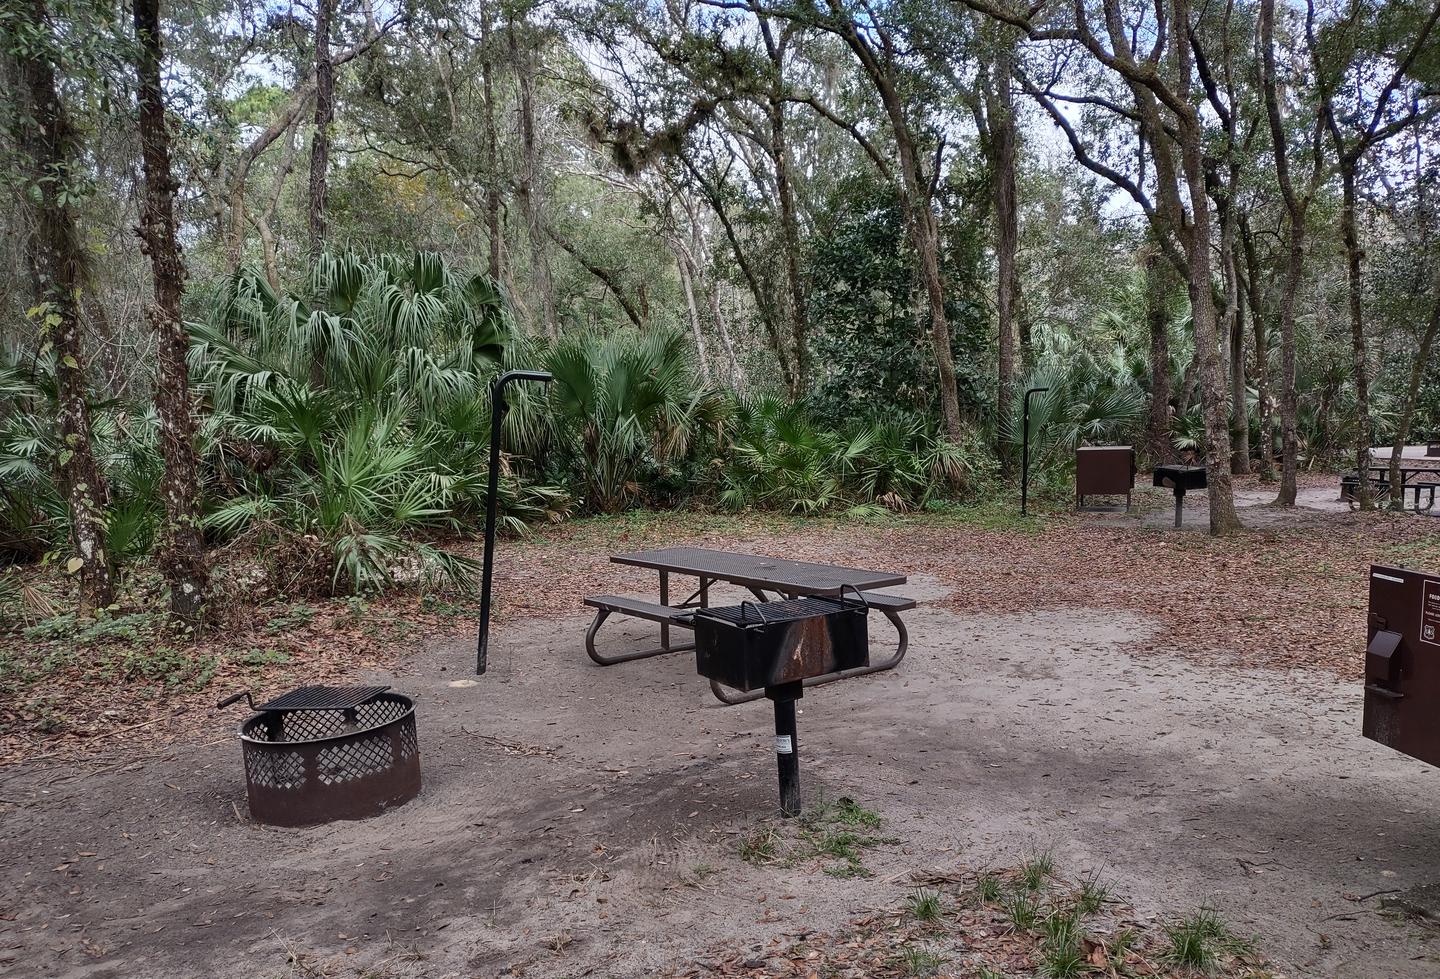 Another view of site 28Amenities: picnic table, light pole, fire ring, grill, bear-proof storage locker